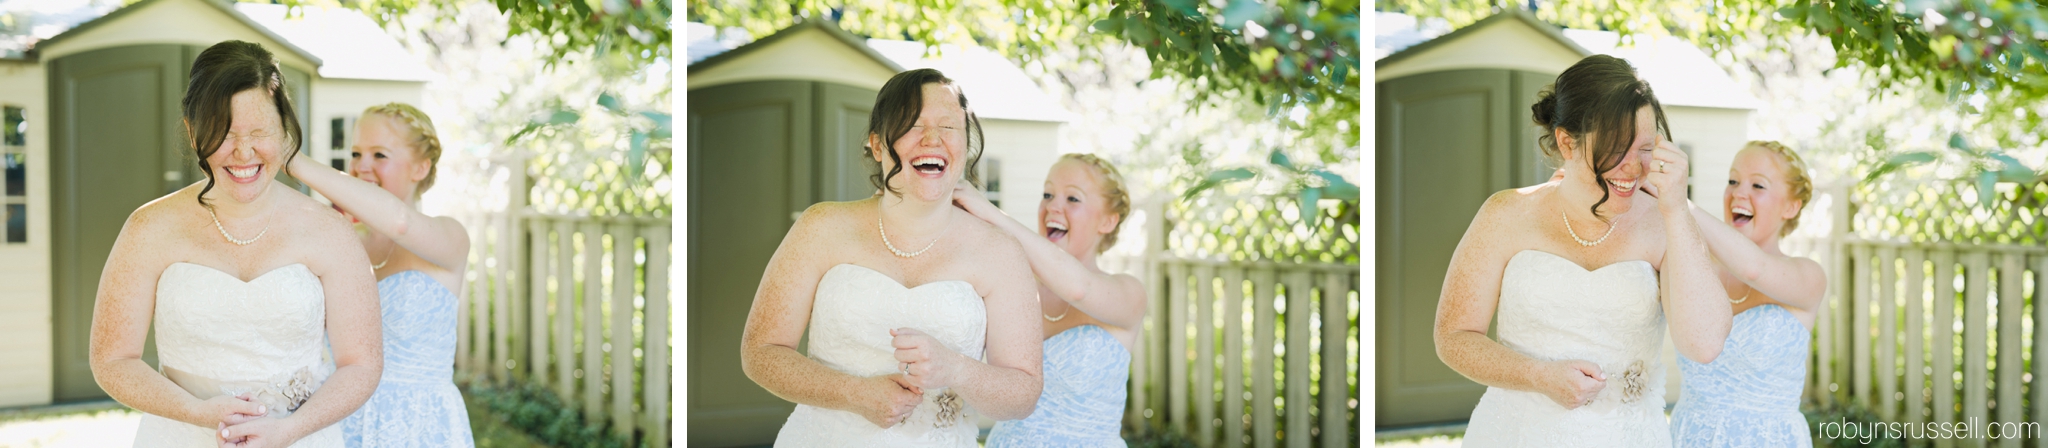 3-silly-moments-with-bridesmaid.jpg